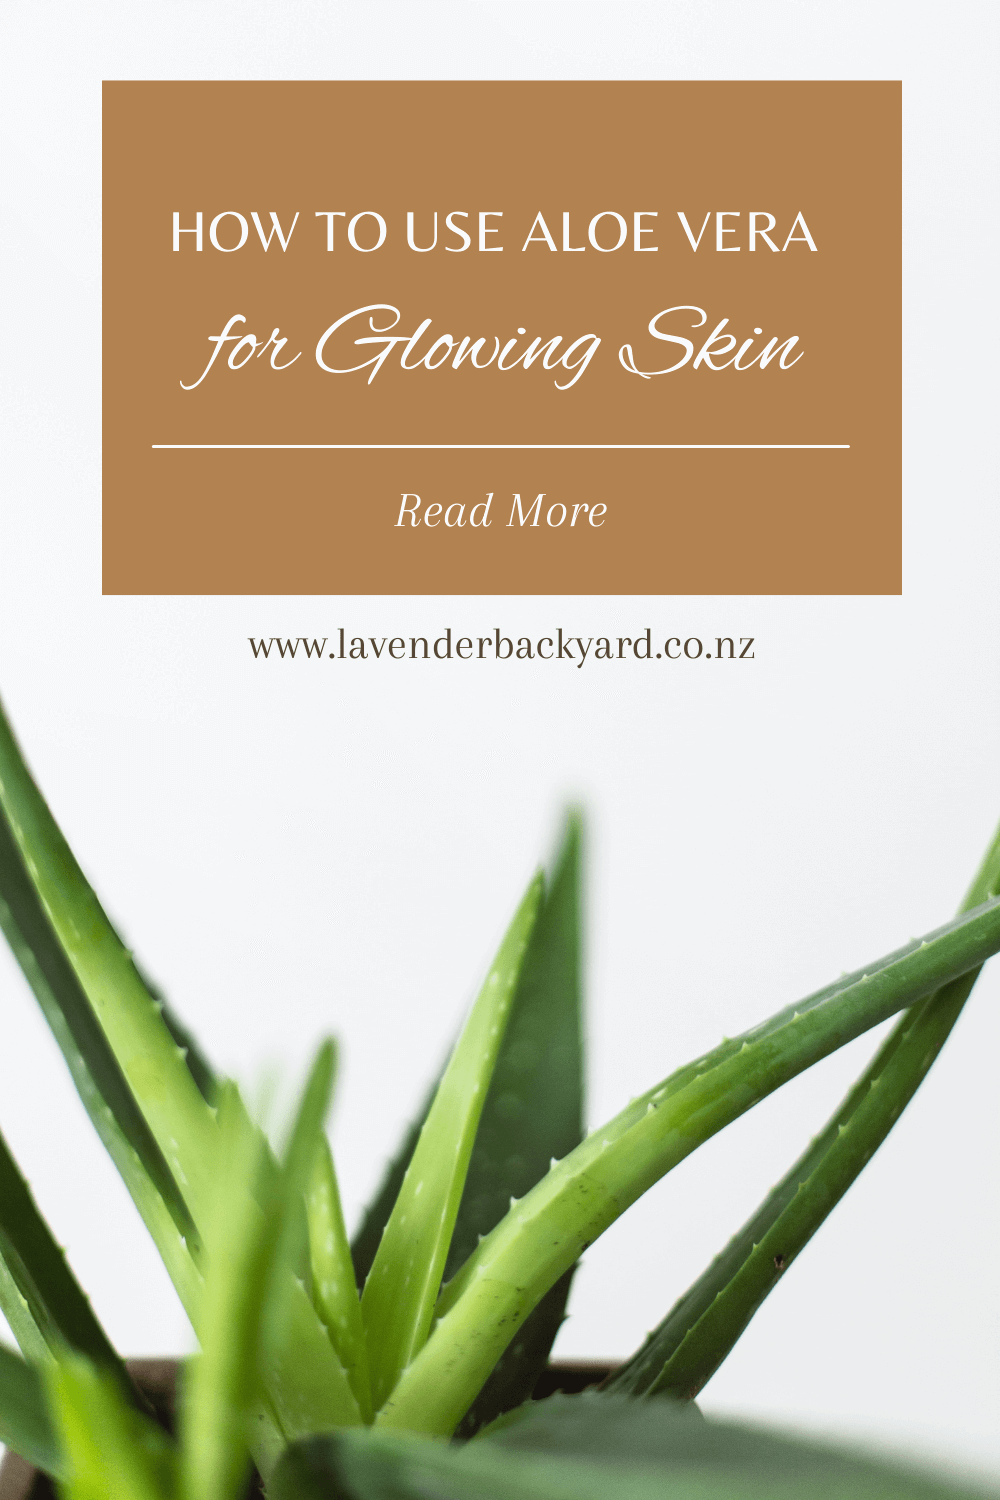 How To Use Aloe Vera for Glowing Skin?